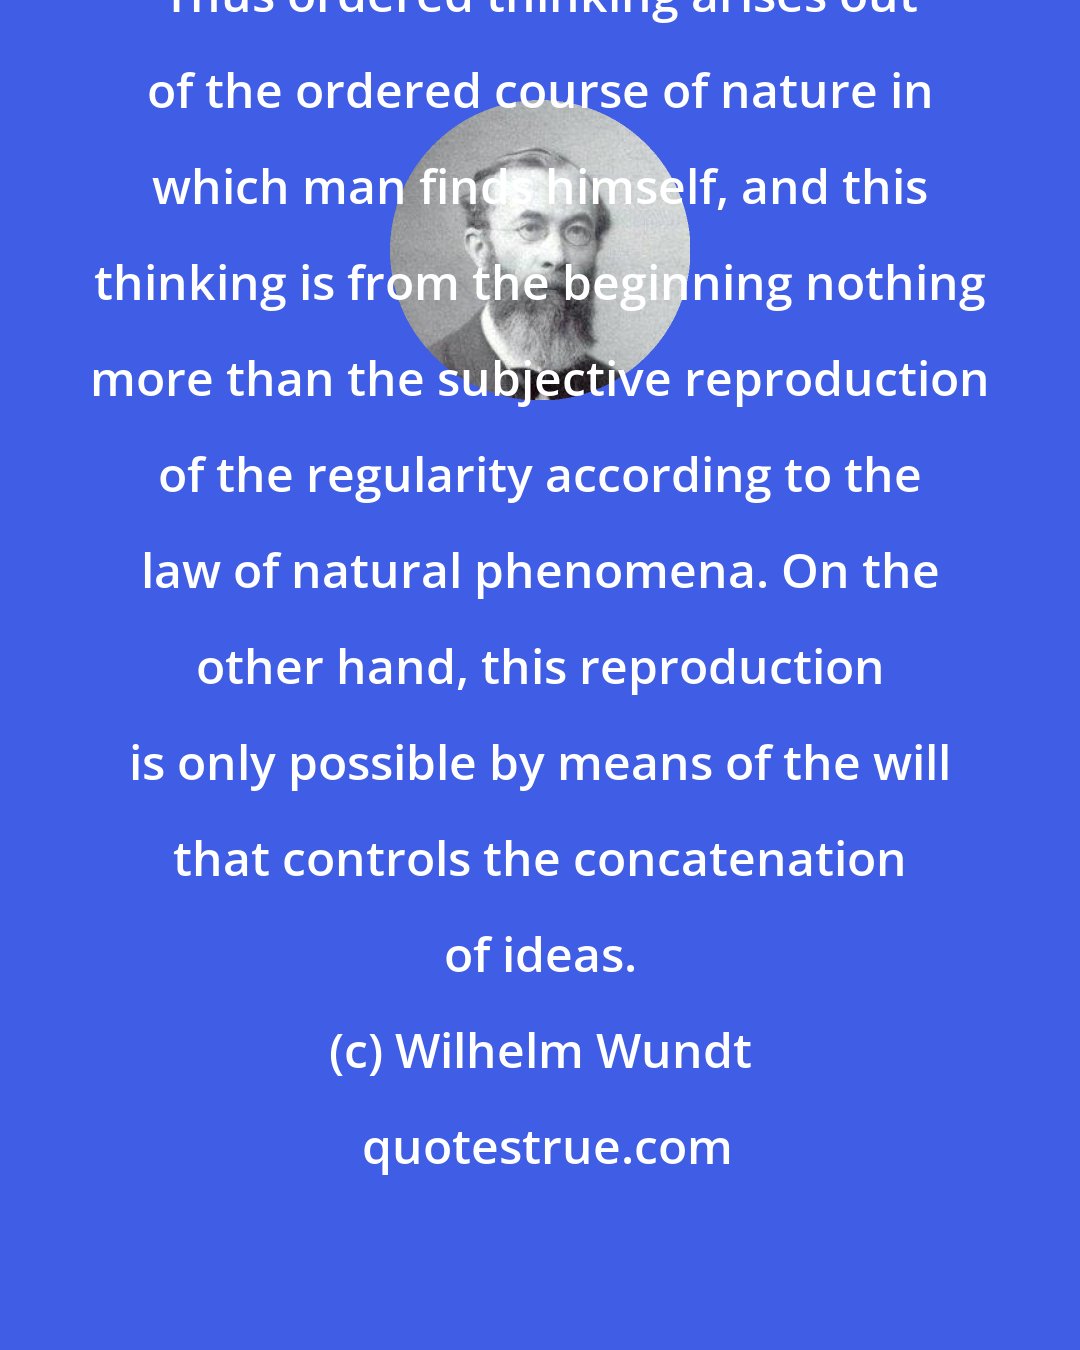 Wilhelm Wundt: Thus ordered thinking arises out of the ordered course of nature in which man finds himself, and this thinking is from the beginning nothing more than the subjective reproduction of the regularity according to the law of natural phenomena. On the other hand, this reproduction is only possible by means of the will that controls the concatenation of ideas.